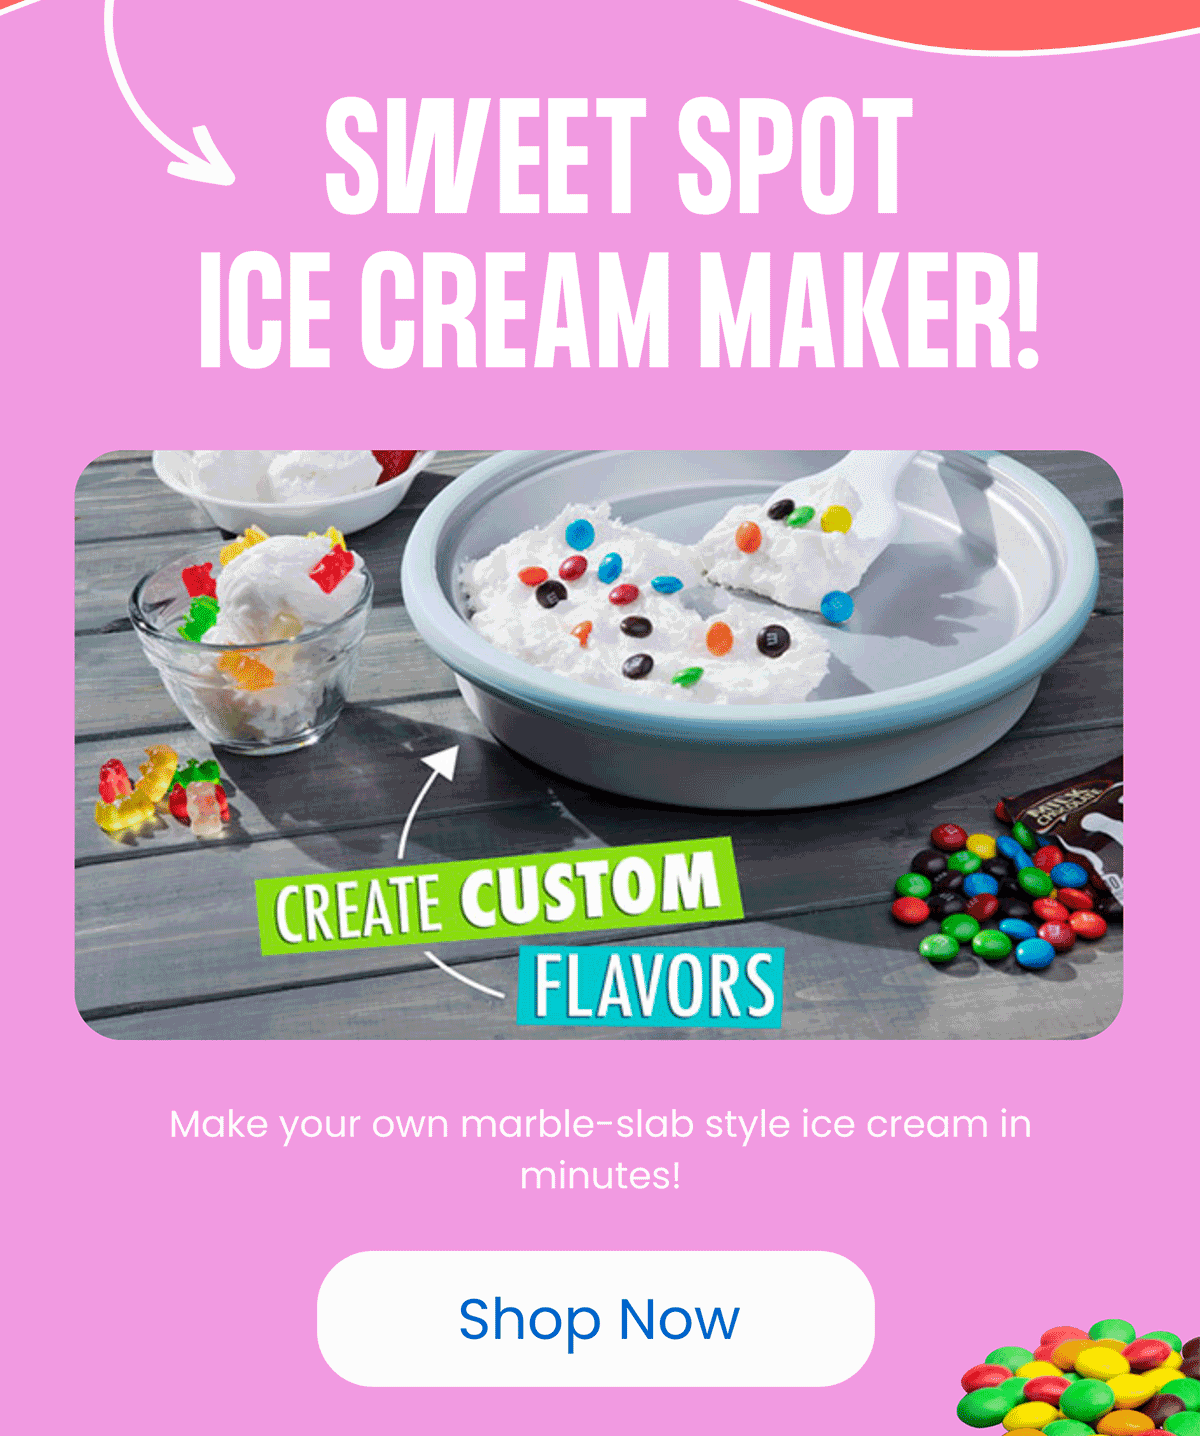 Sweet Spot Ice Cream Maker! Make your own marble-slab style ice cream in minutes!